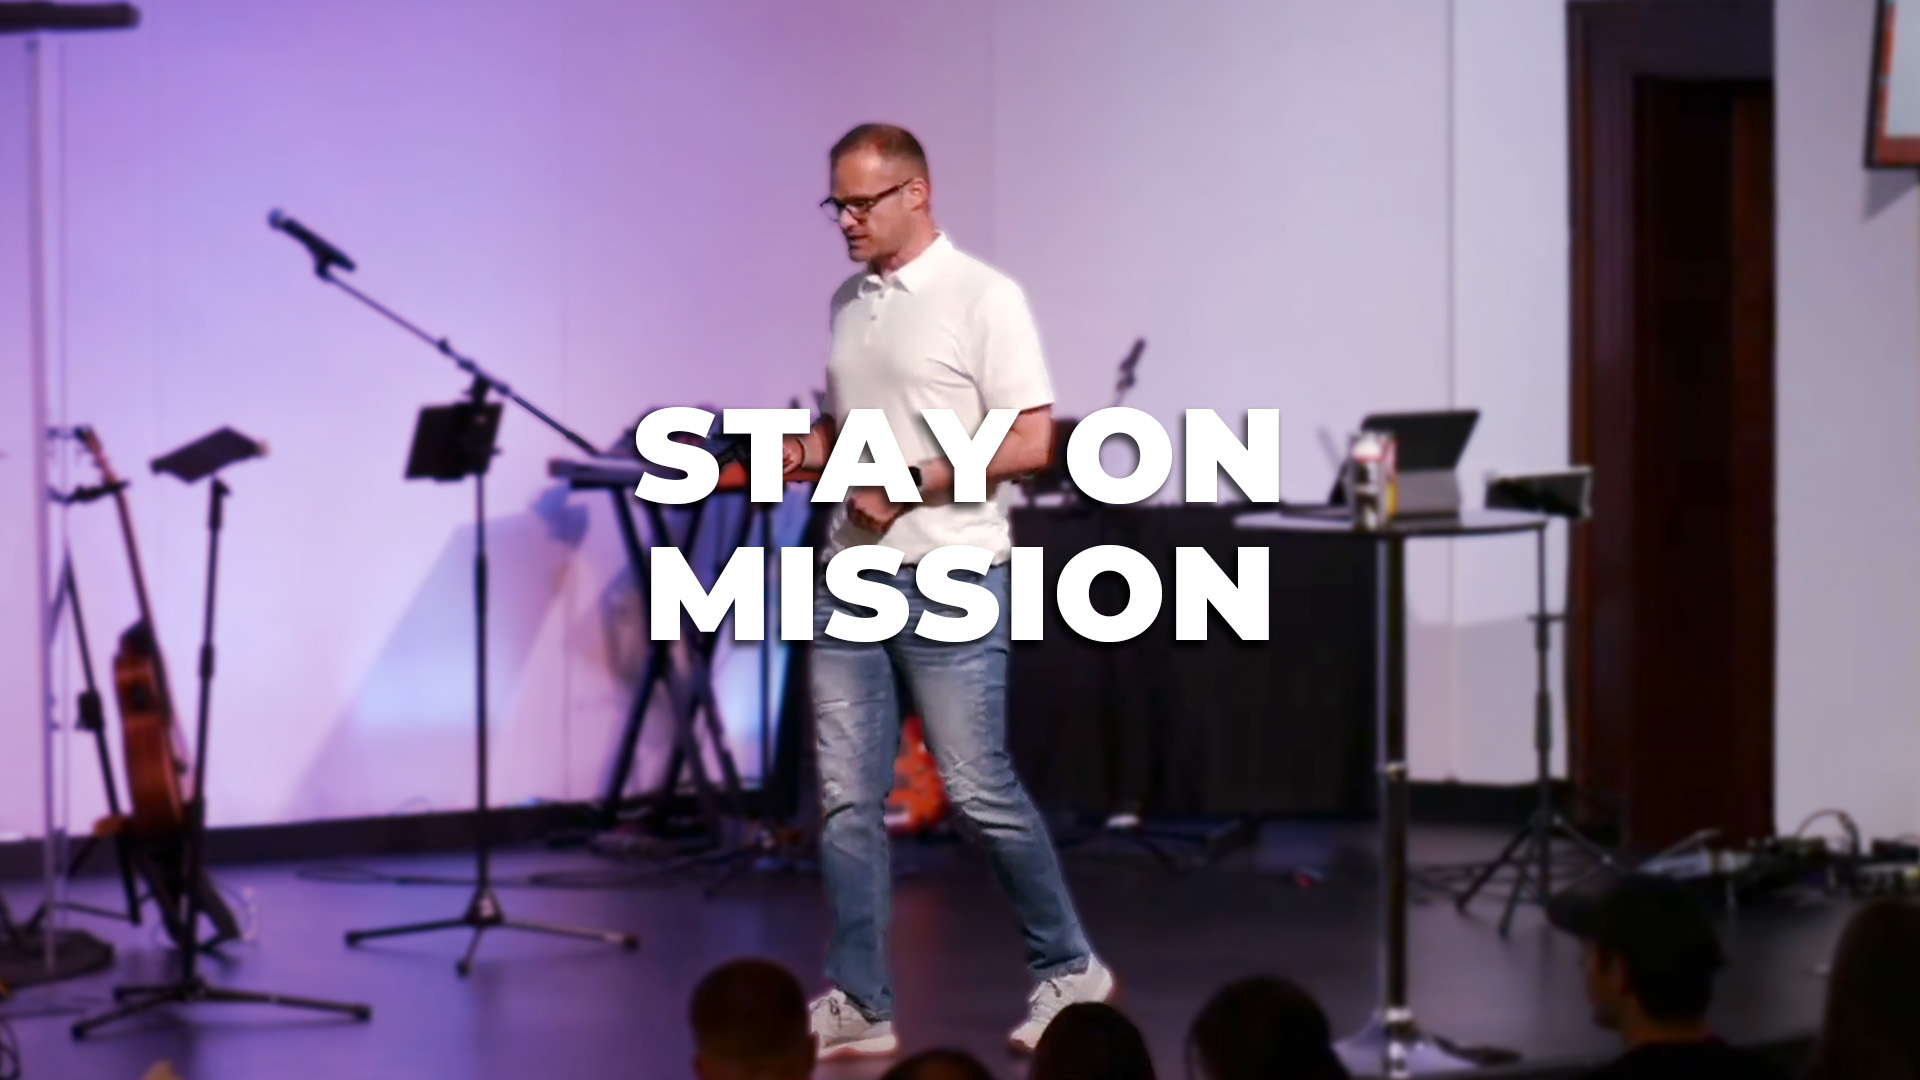 Stay on Mission